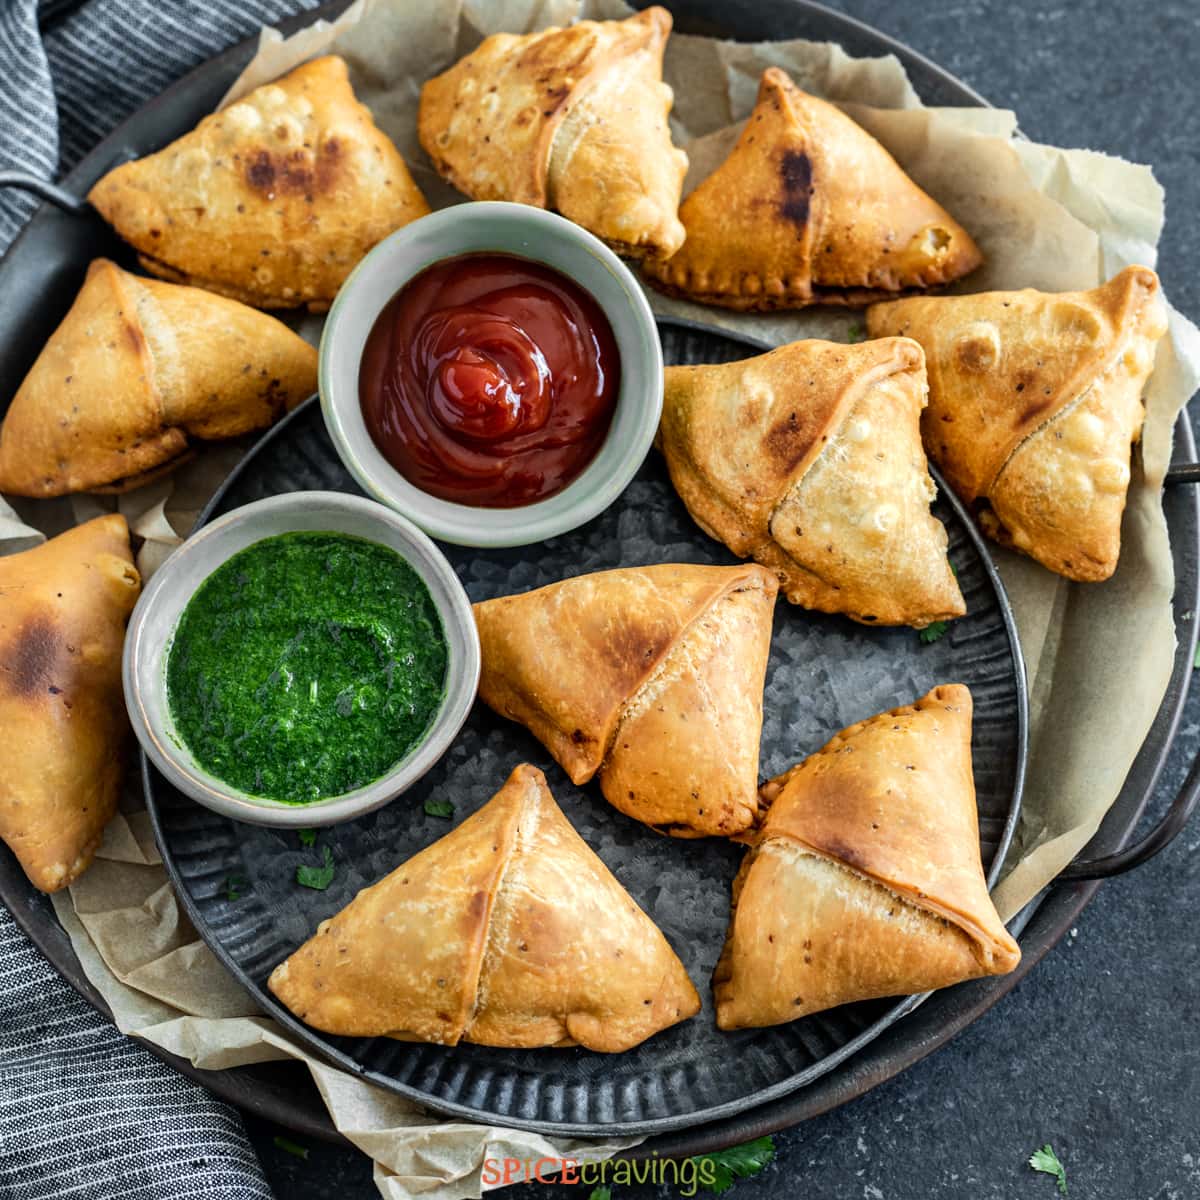 Samosas The Traditional Way The Easy Way Recipe Indian Food | My XXX ...